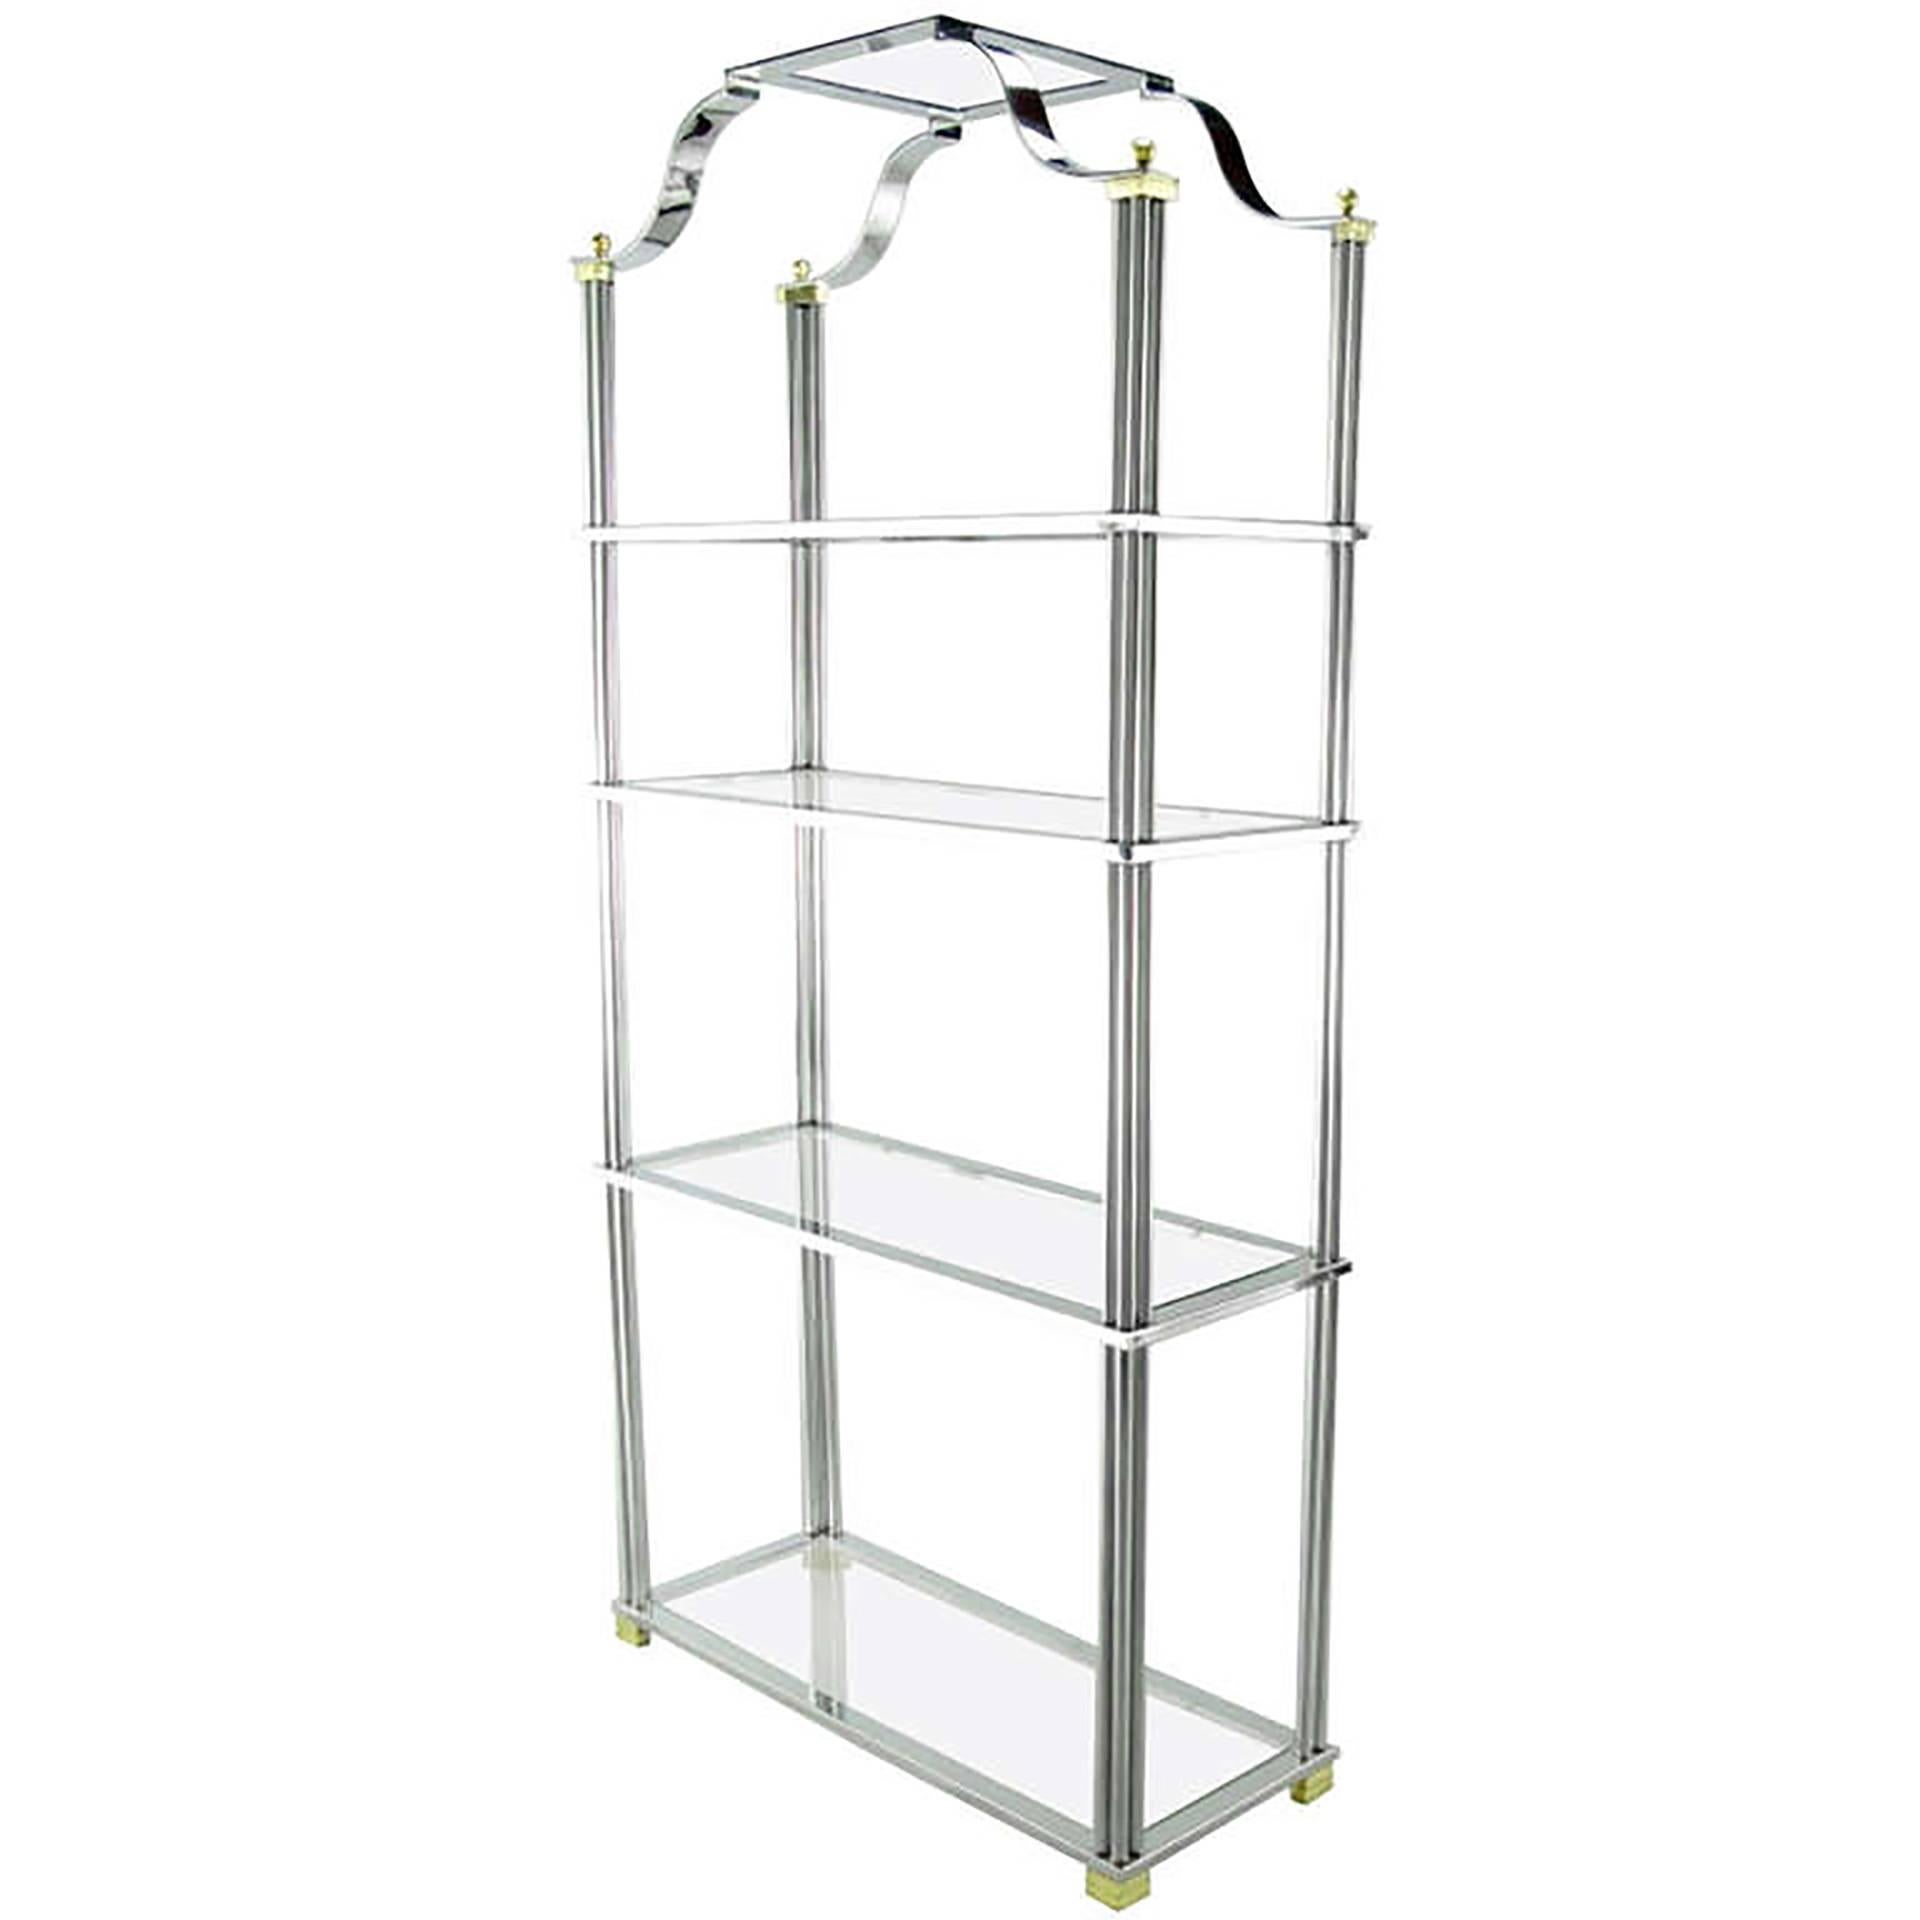 Chrome and brass four shelf ètagerè with excellent understated details. Each shelf is supported by 12 chromed bars with brass ferrules. The open chromed canopy is attached to the brass cornered top supports with four brass ball finials. The feet are